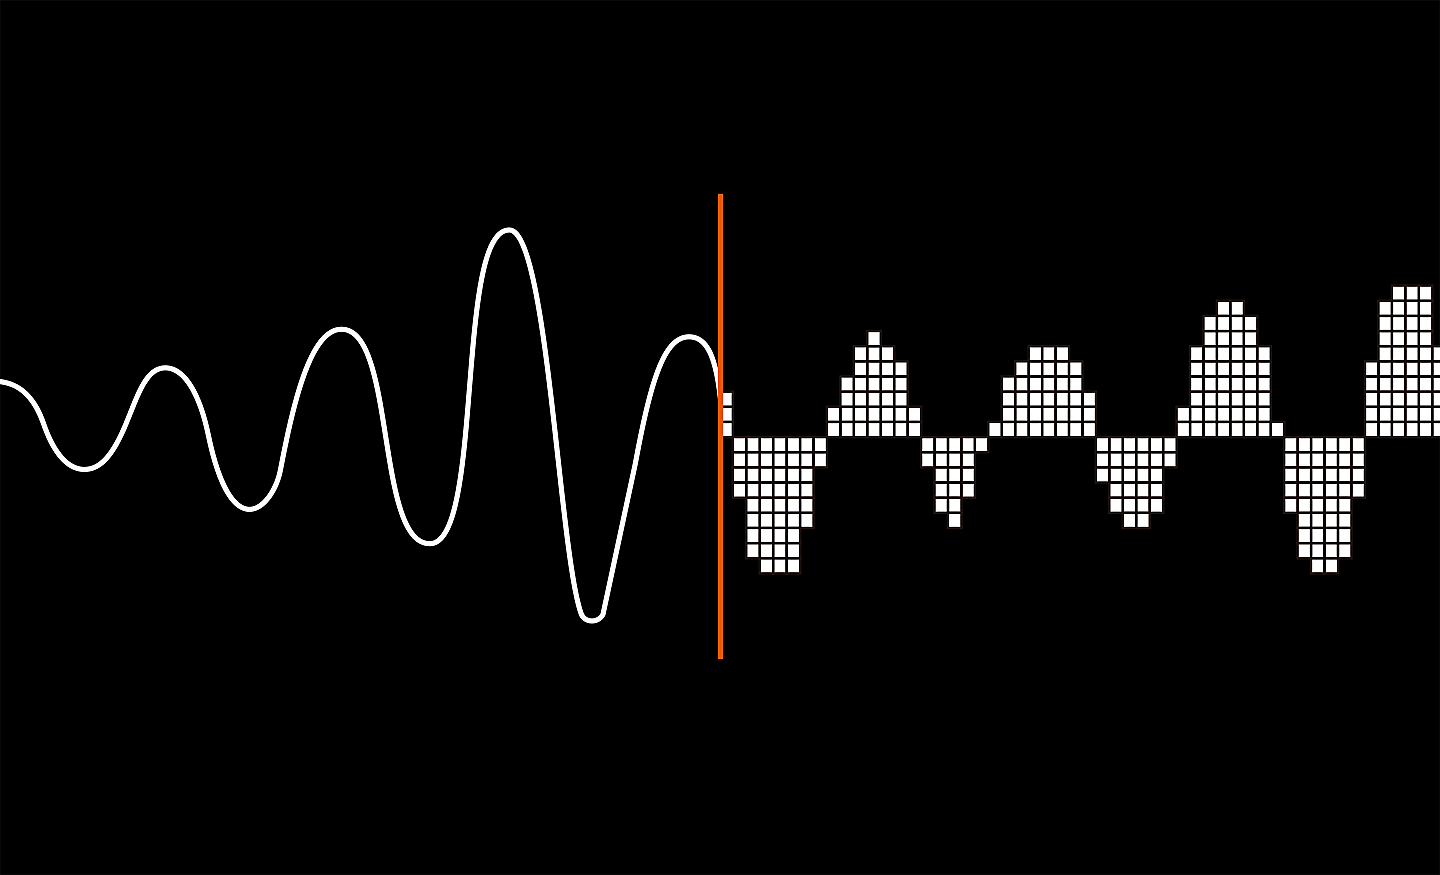 Illustrations that use sound wave to show how analog sound is converted to digital sound.